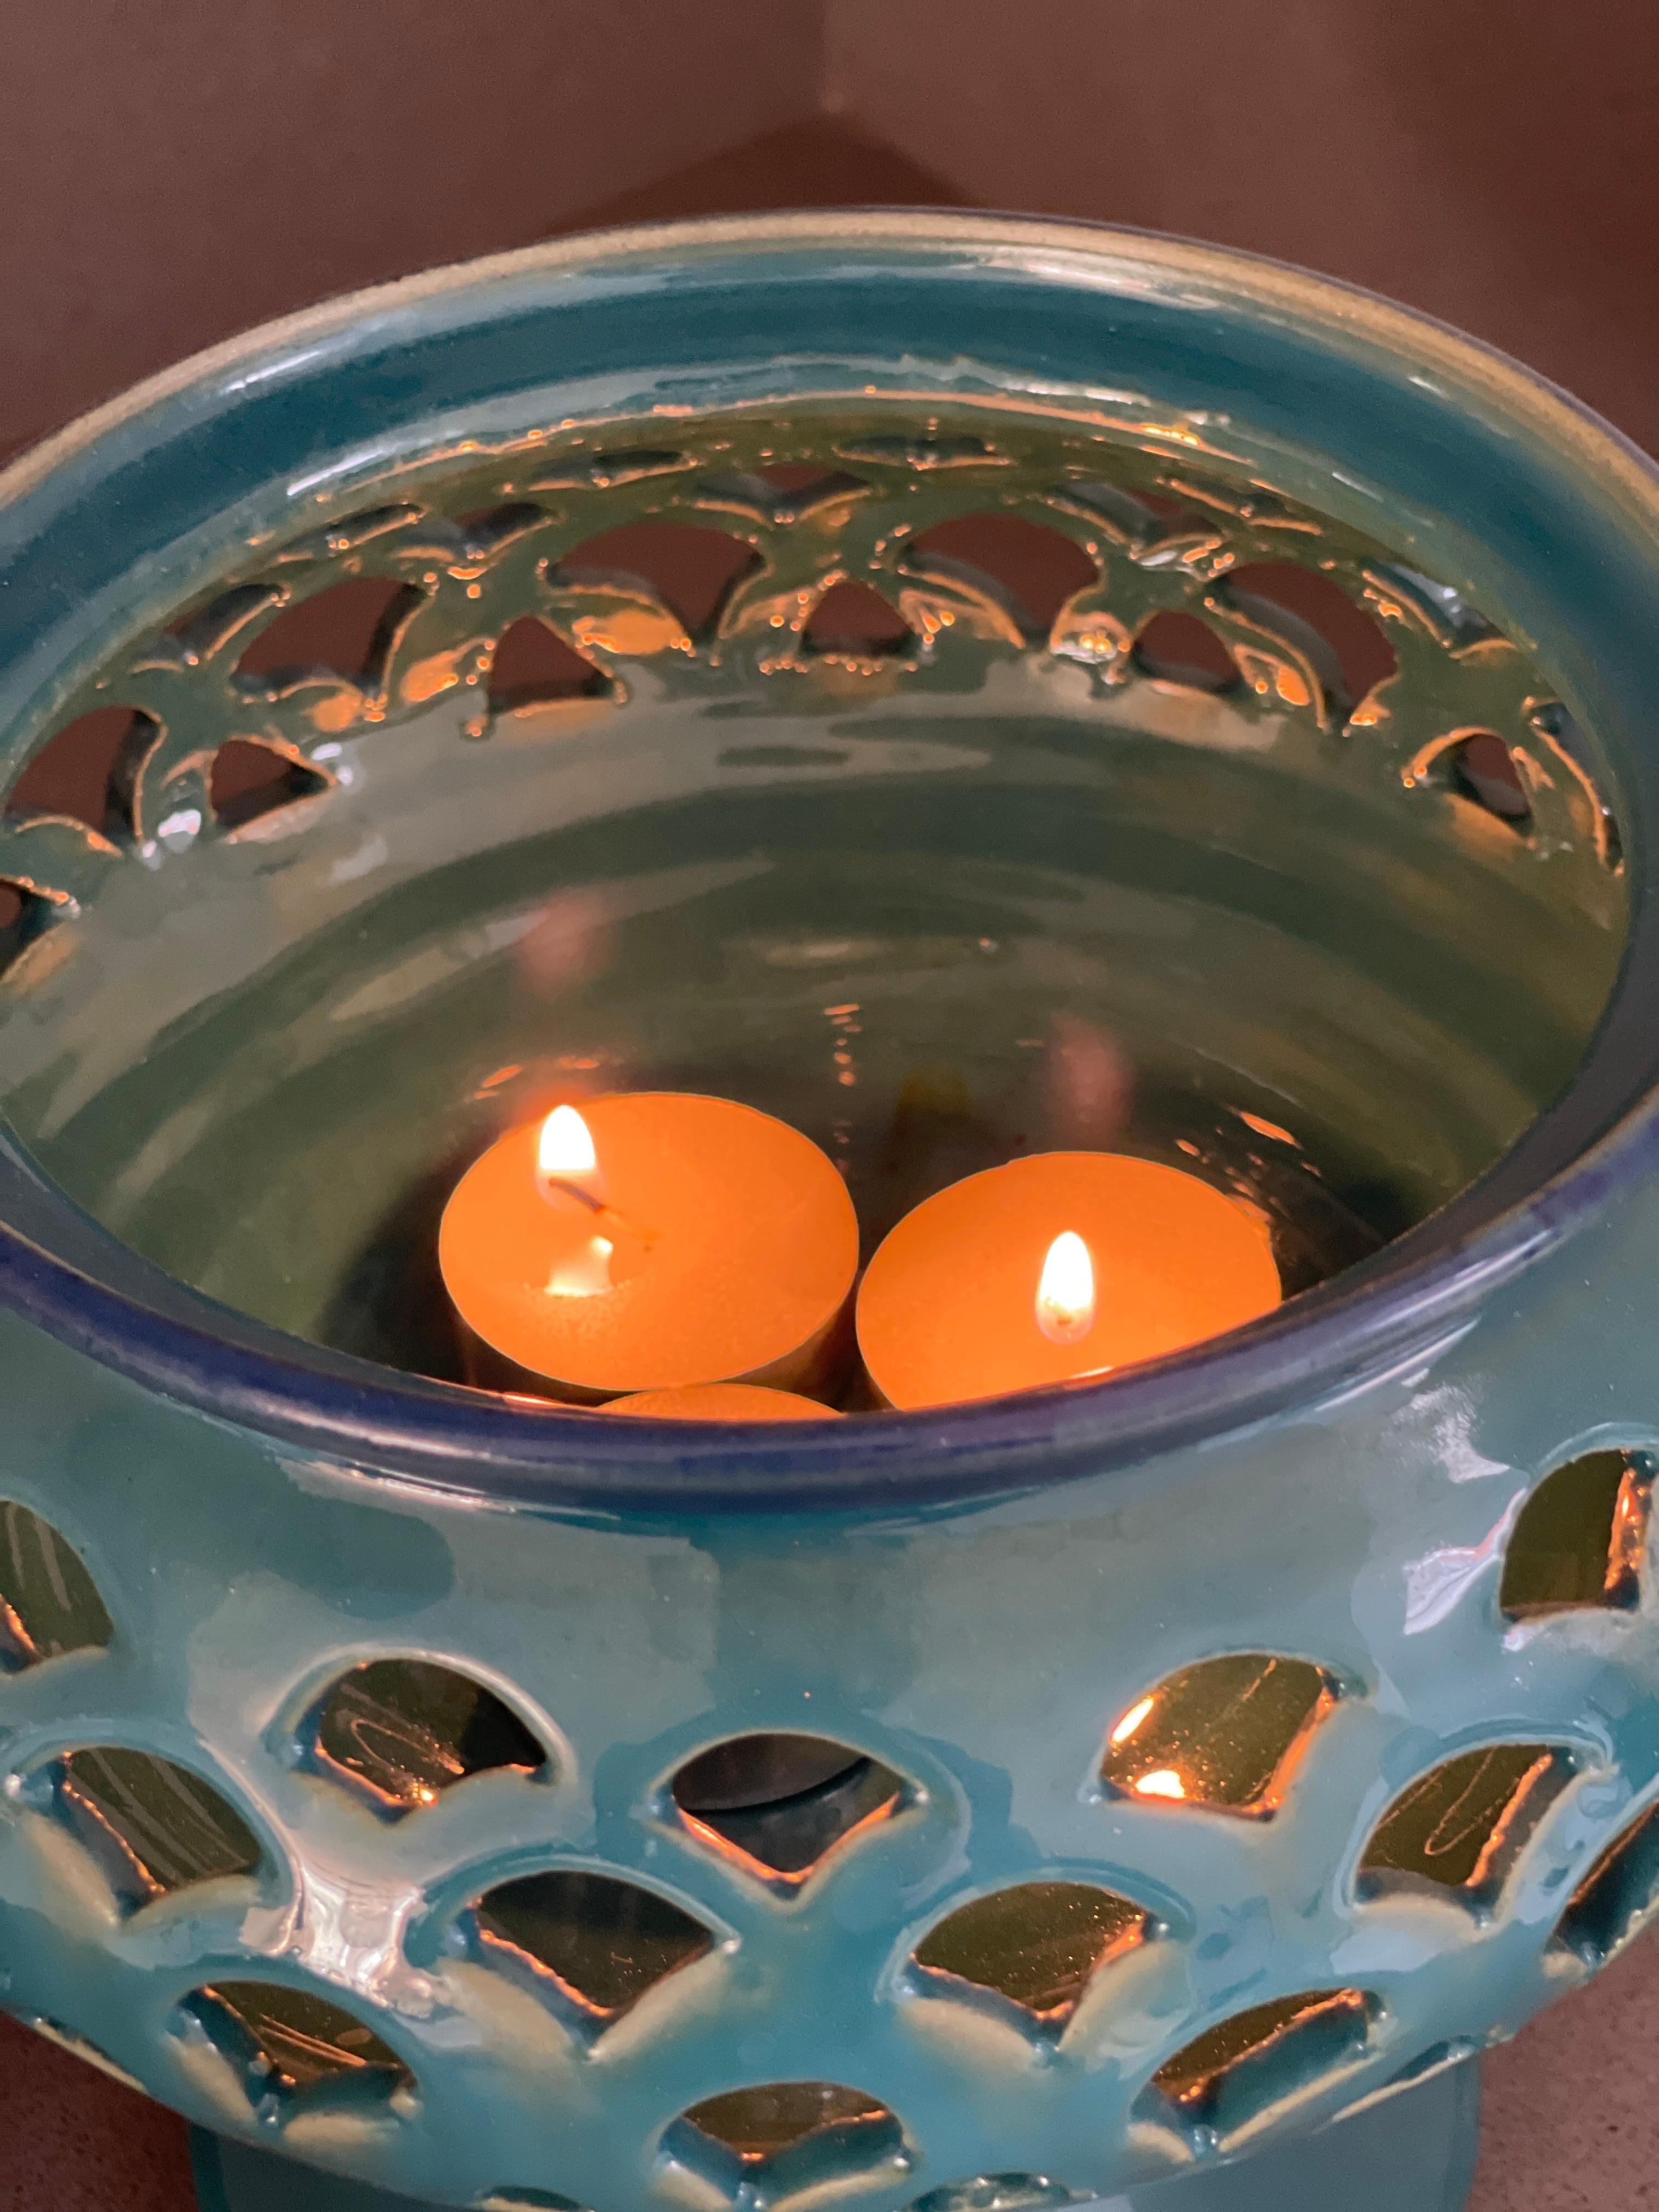 Candle Holder Hand Crafted Blue Ceramic Torches With Stand &Lid For Sale 4